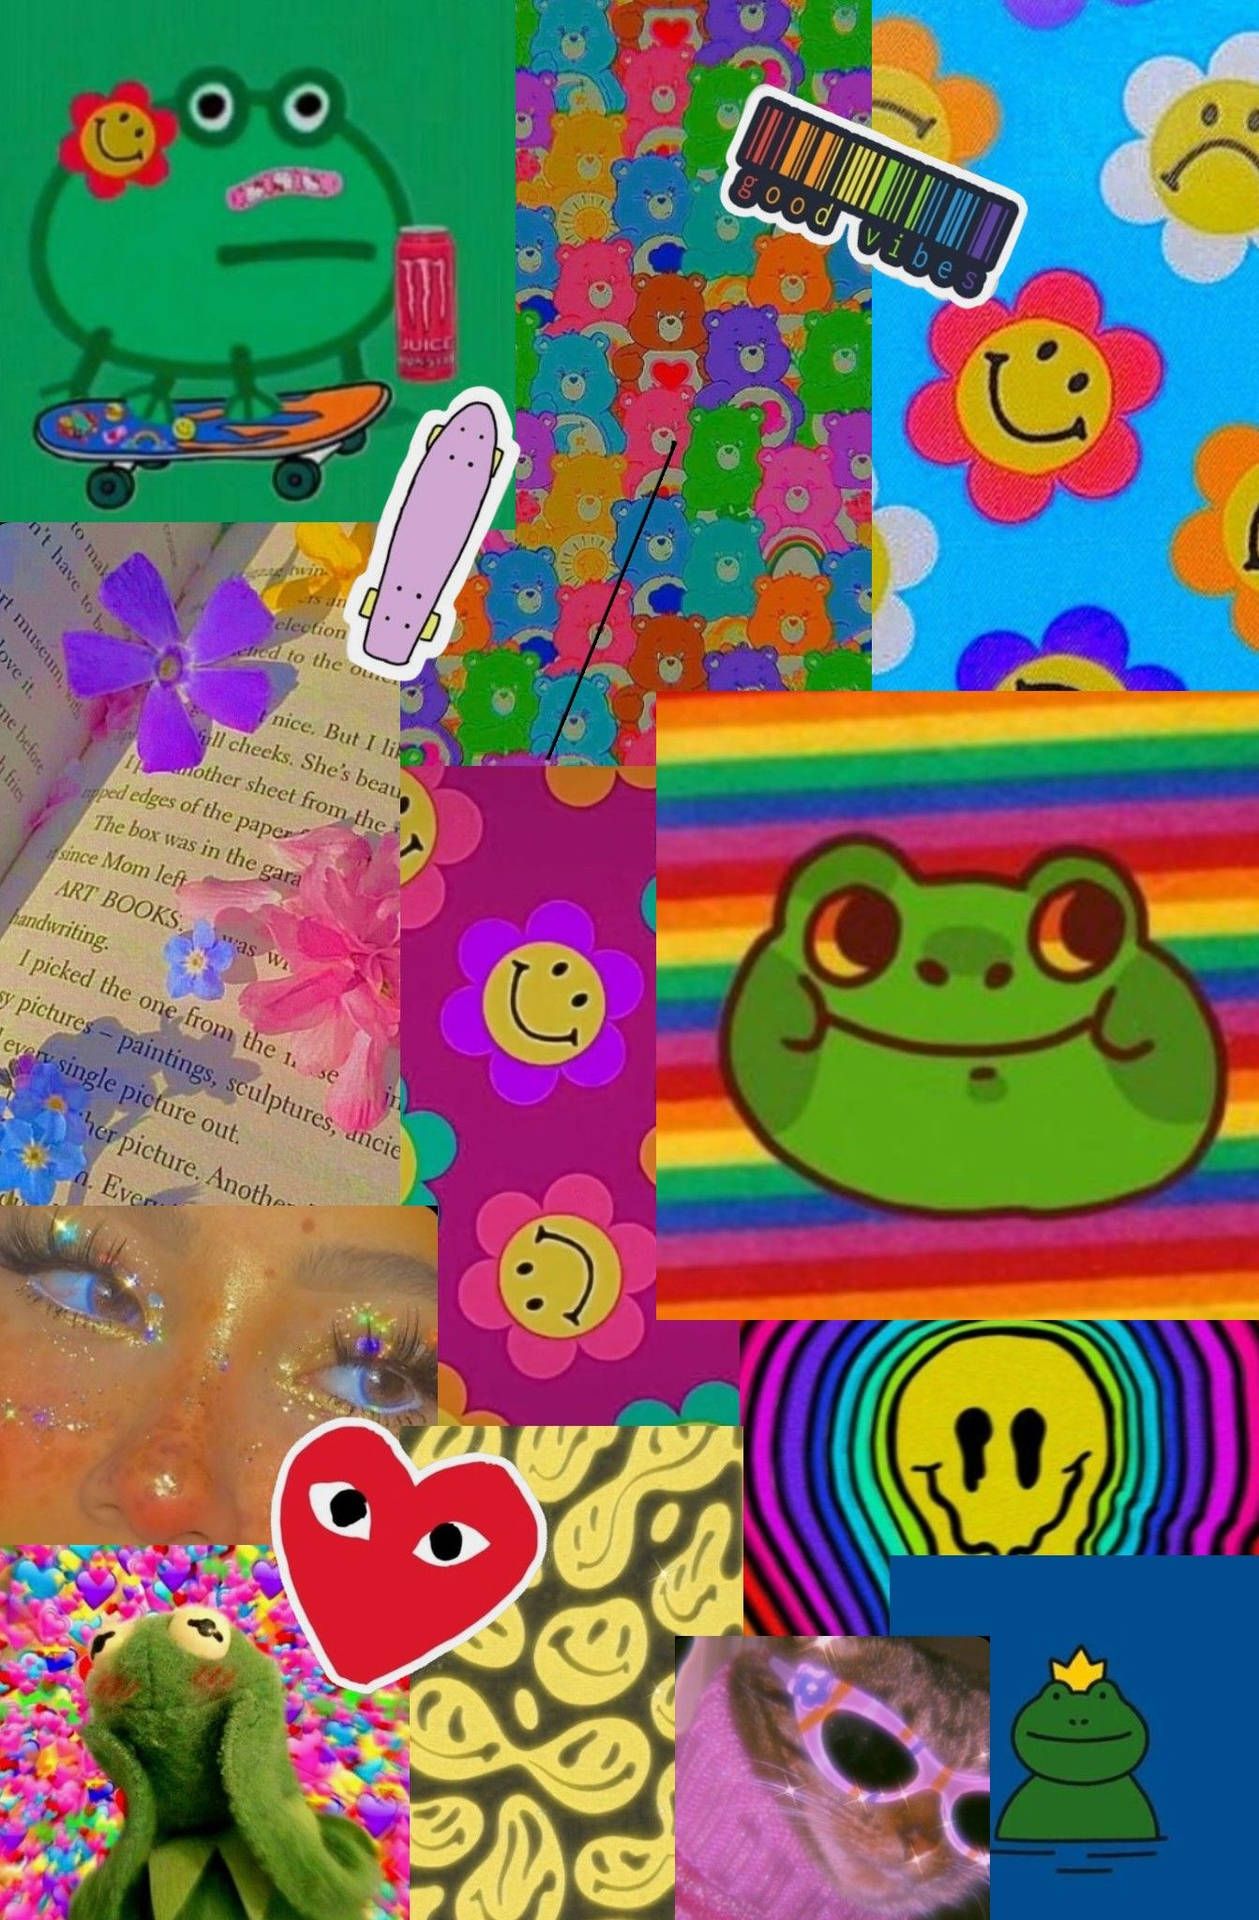 A collage of different images with smiley faces - Indie, frog